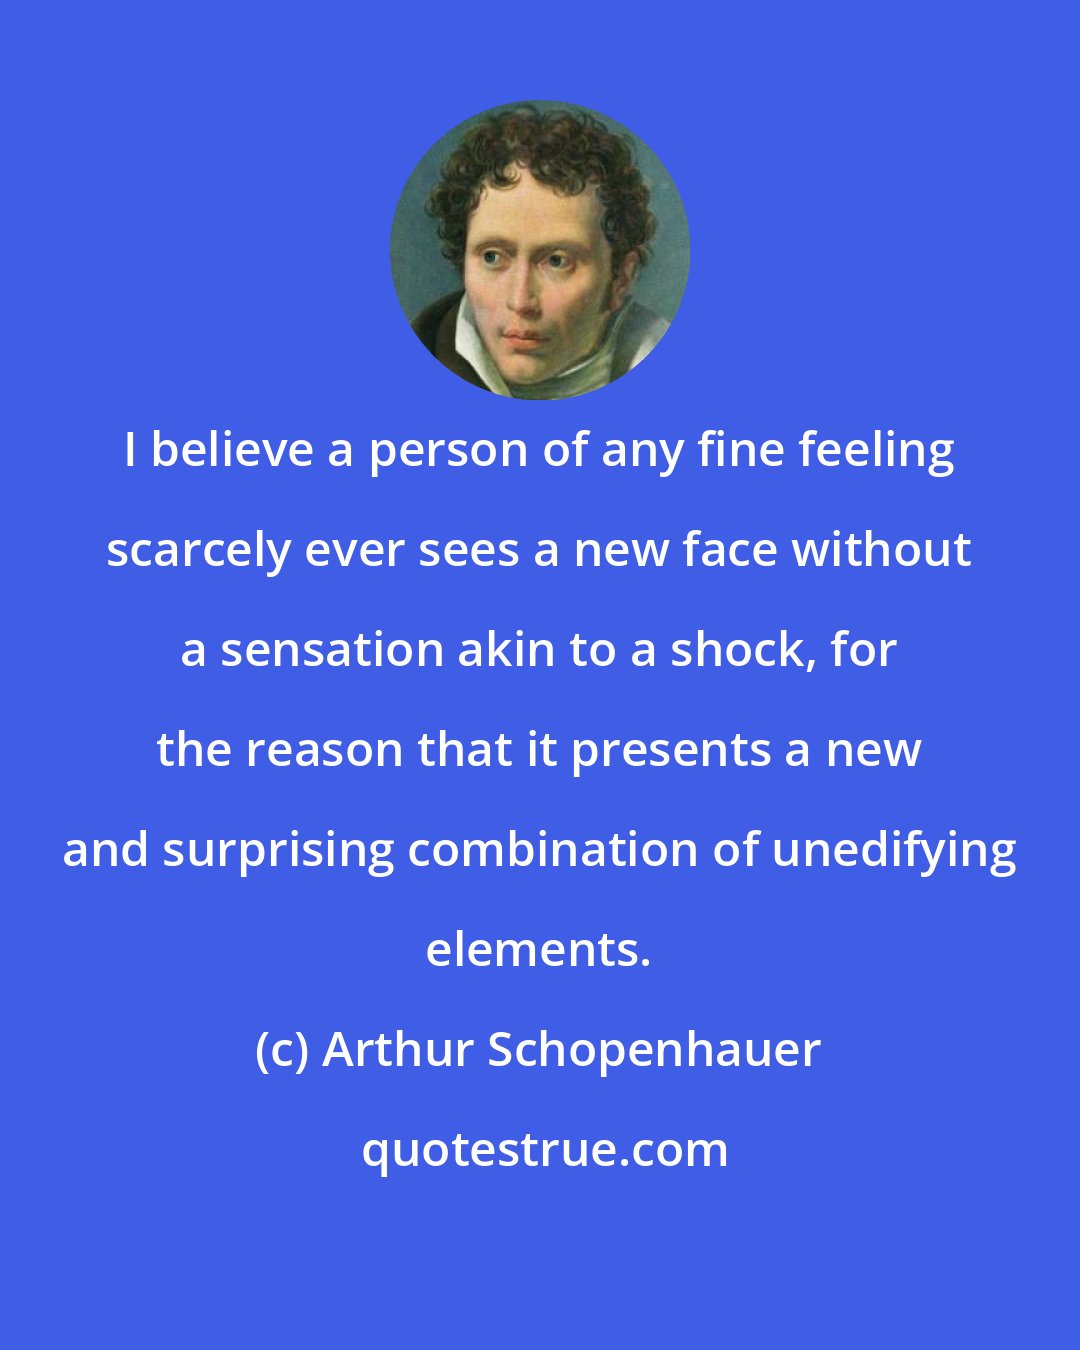 Arthur Schopenhauer: I believe a person of any fine feeling scarcely ever sees a new face without a sensation akin to a shock, for the reason that it presents a new and surprising combination of unedifying elements.